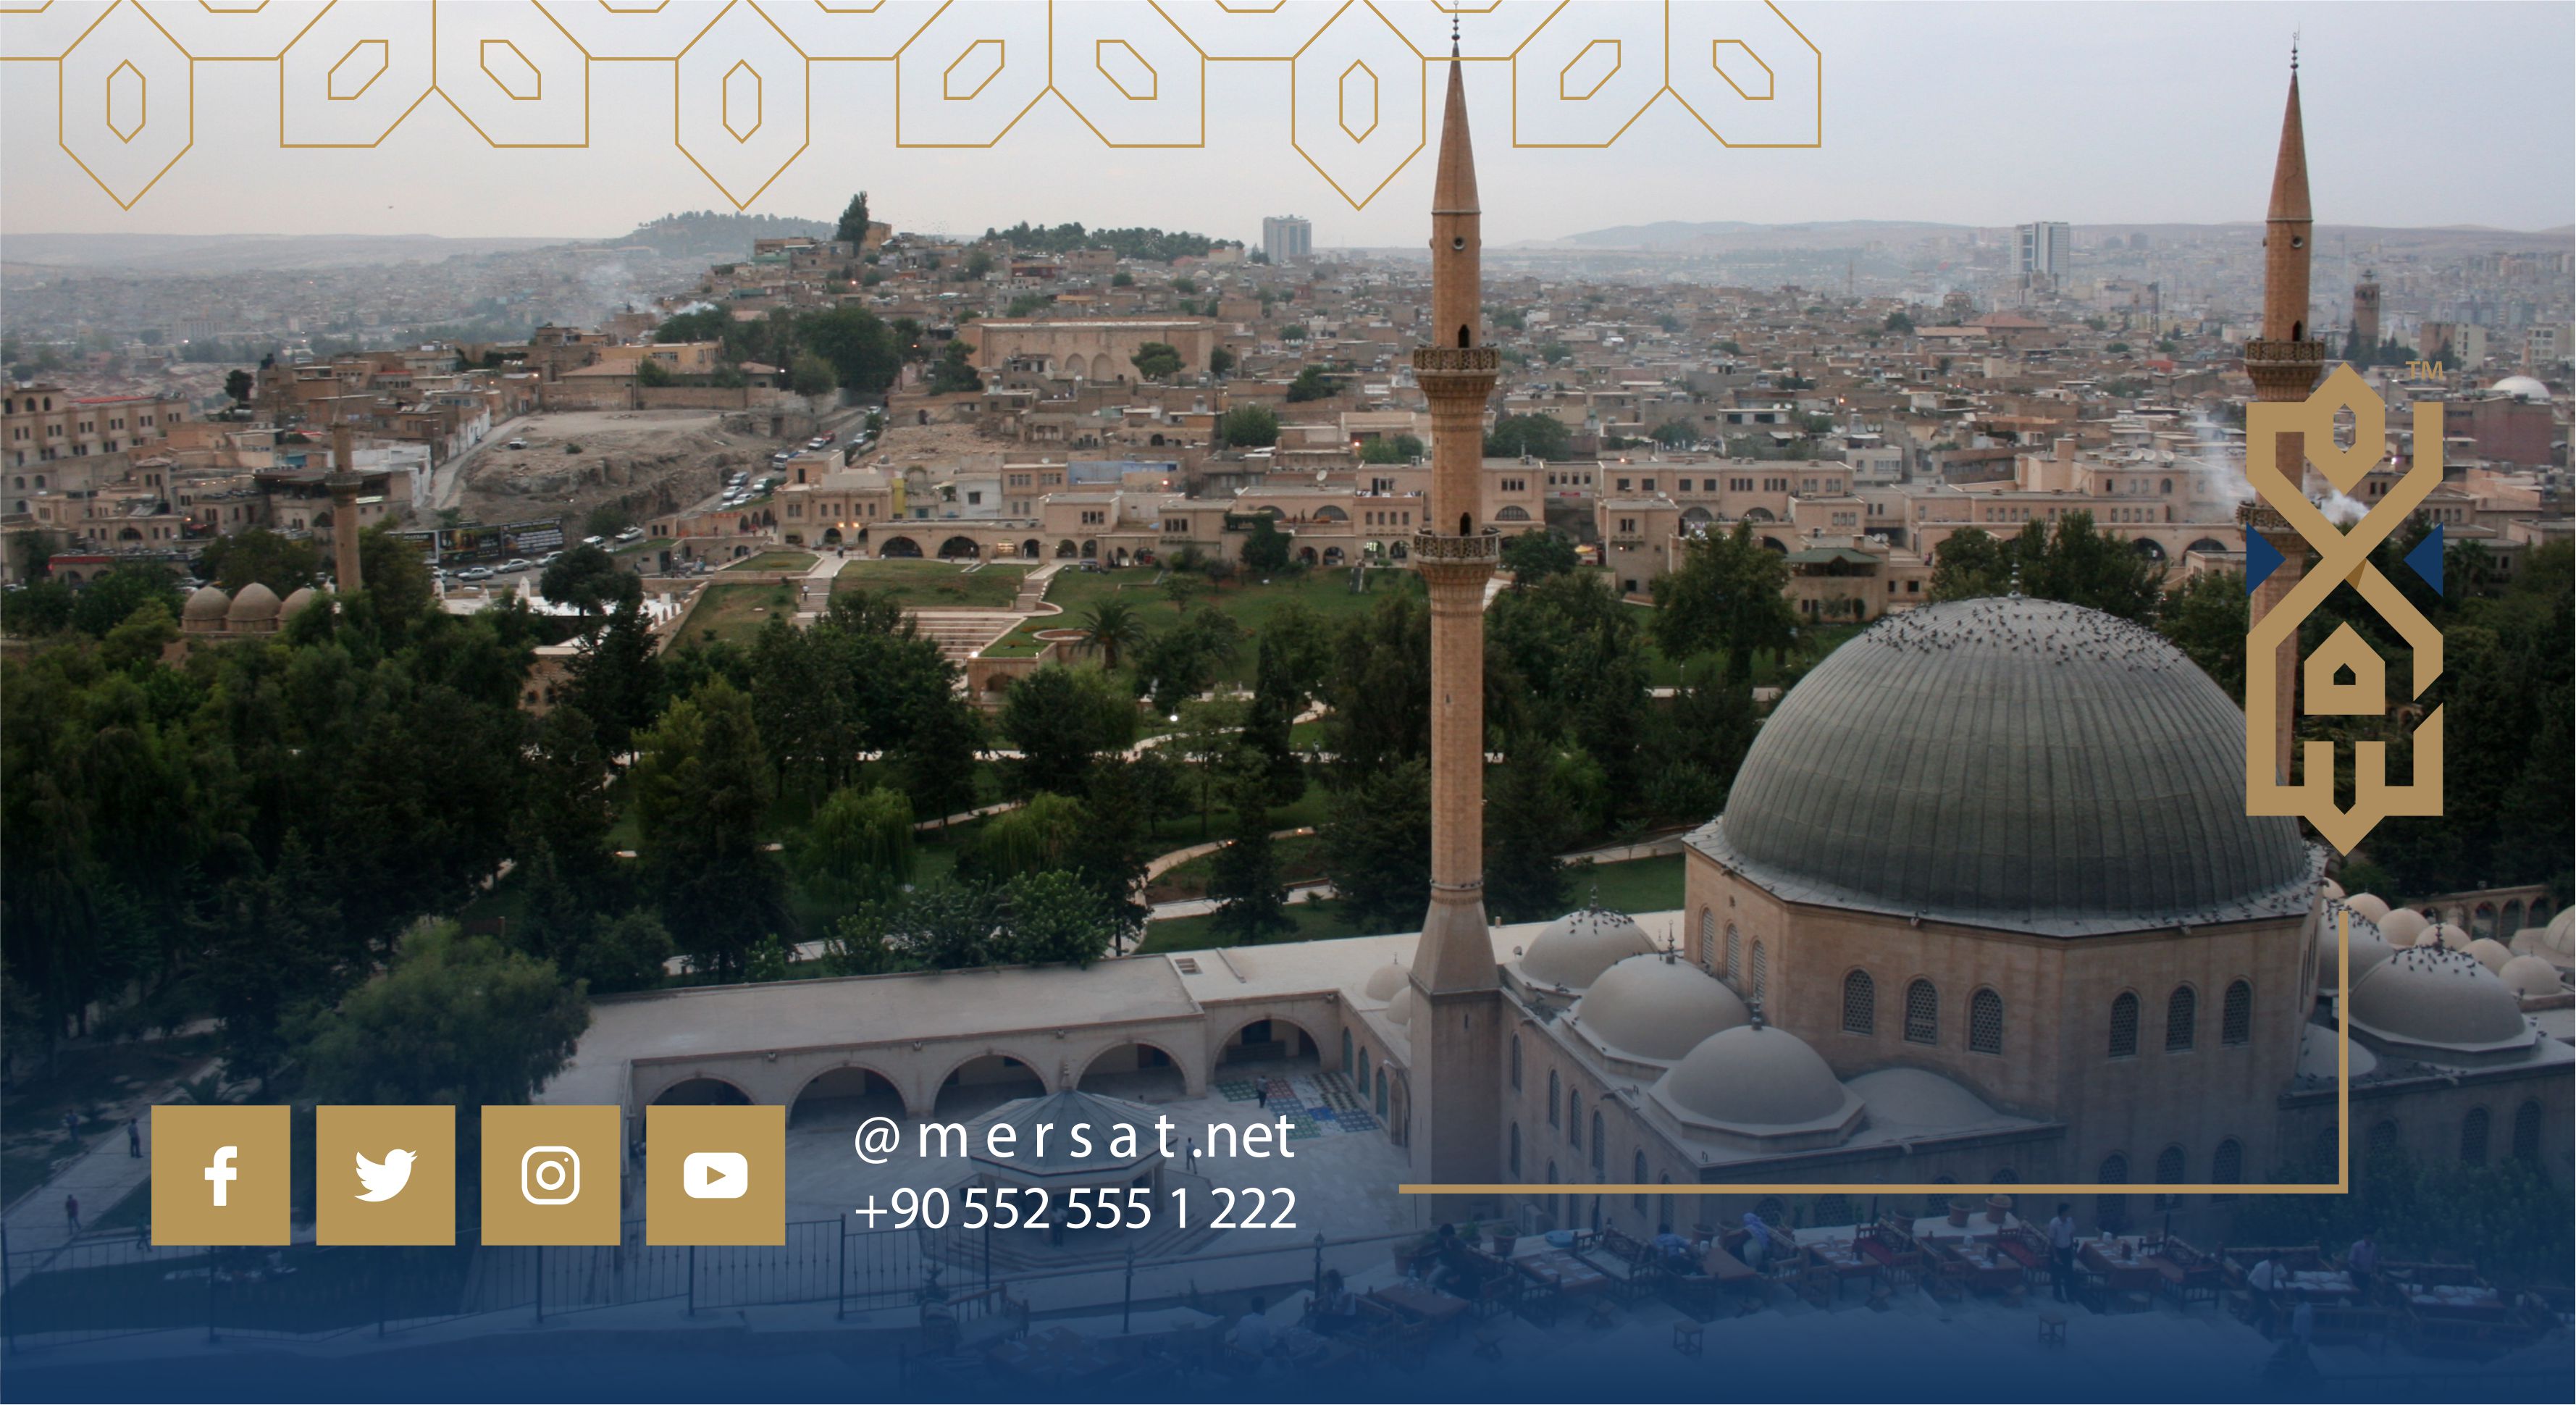 Urfa is the city of the prophets, and some of its neighborhoods are older than the pyramids of Egypt